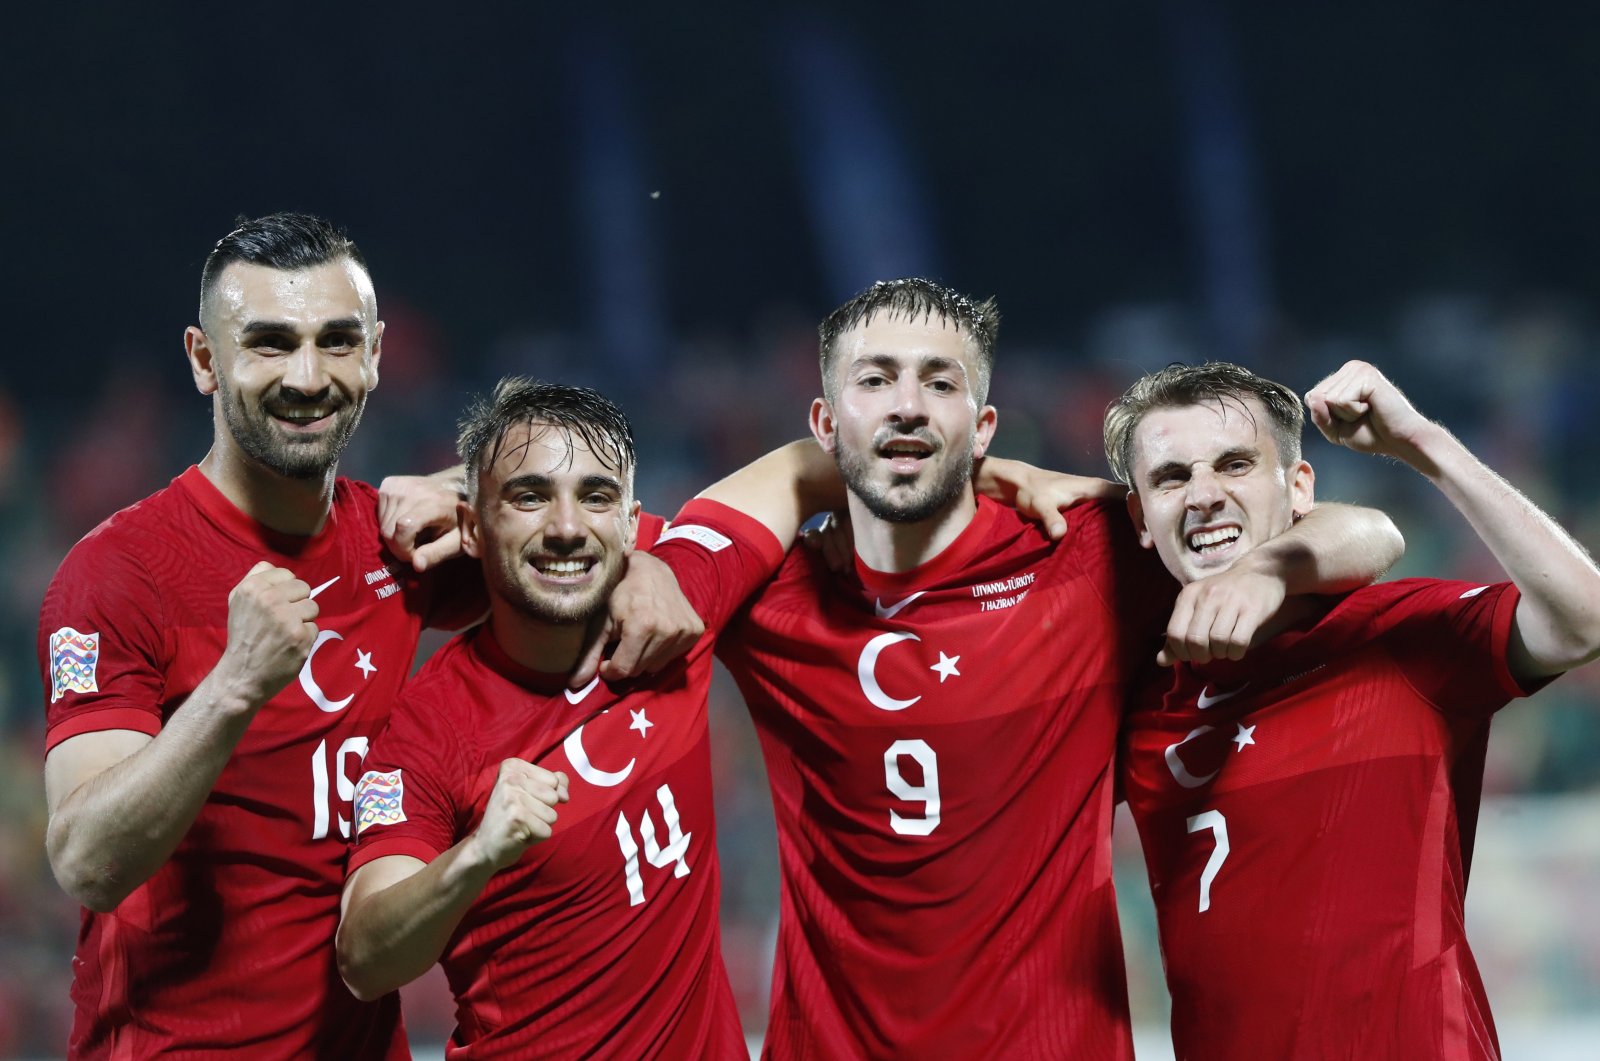 Turkish players celebrate a goal in a UEFA Nations League match against Lithuania, Vilnius, Lithuania, June 7, 2022. (AP Photo)